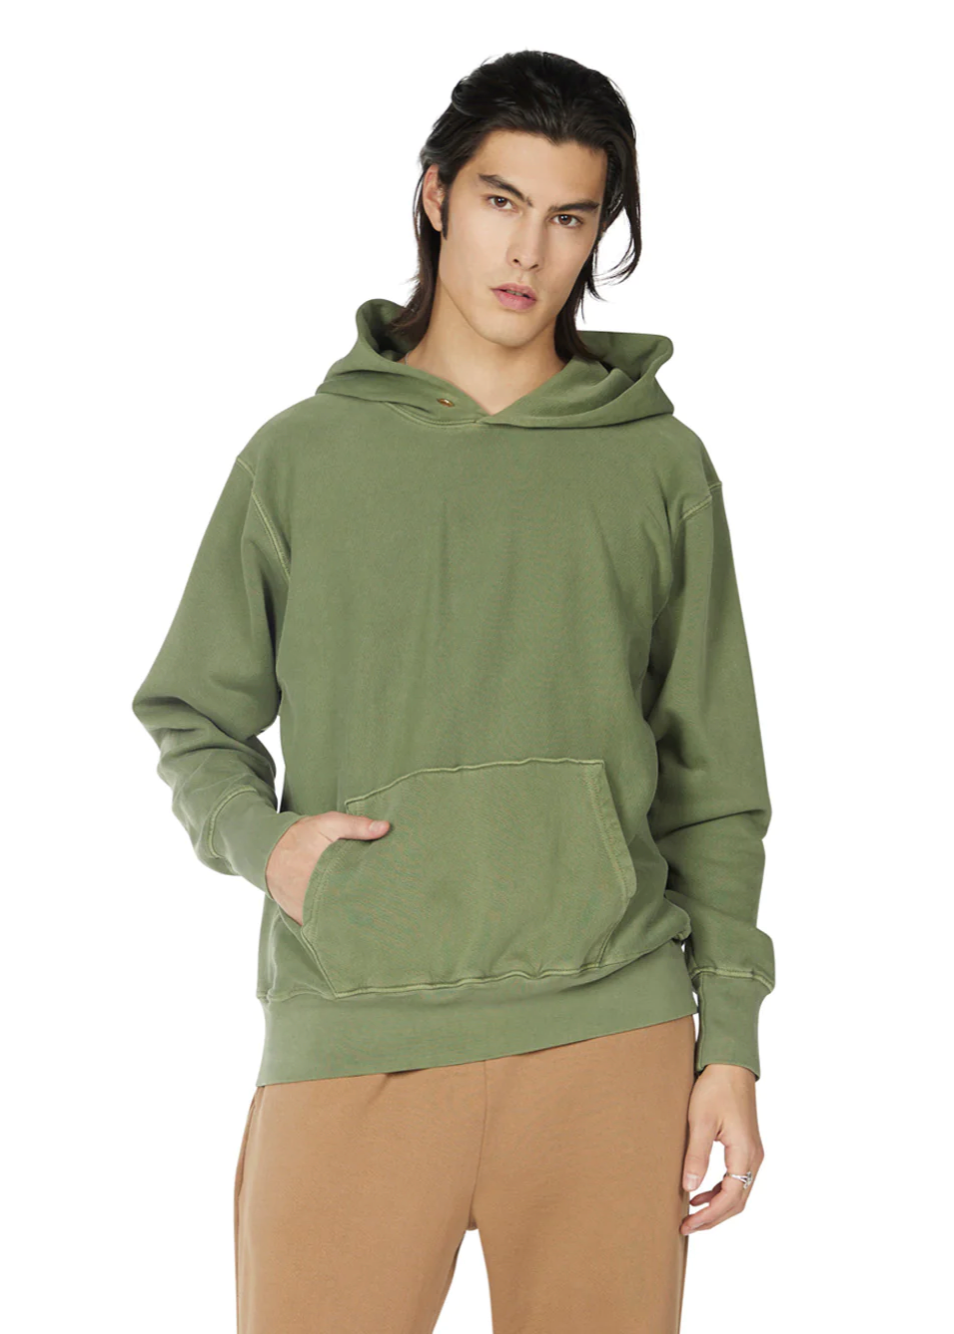 Les Tien Men's Pullover Hoodie (Washed Spruce) - Les Tien Men's Pullover Hoodie (Washed Spruce) - 